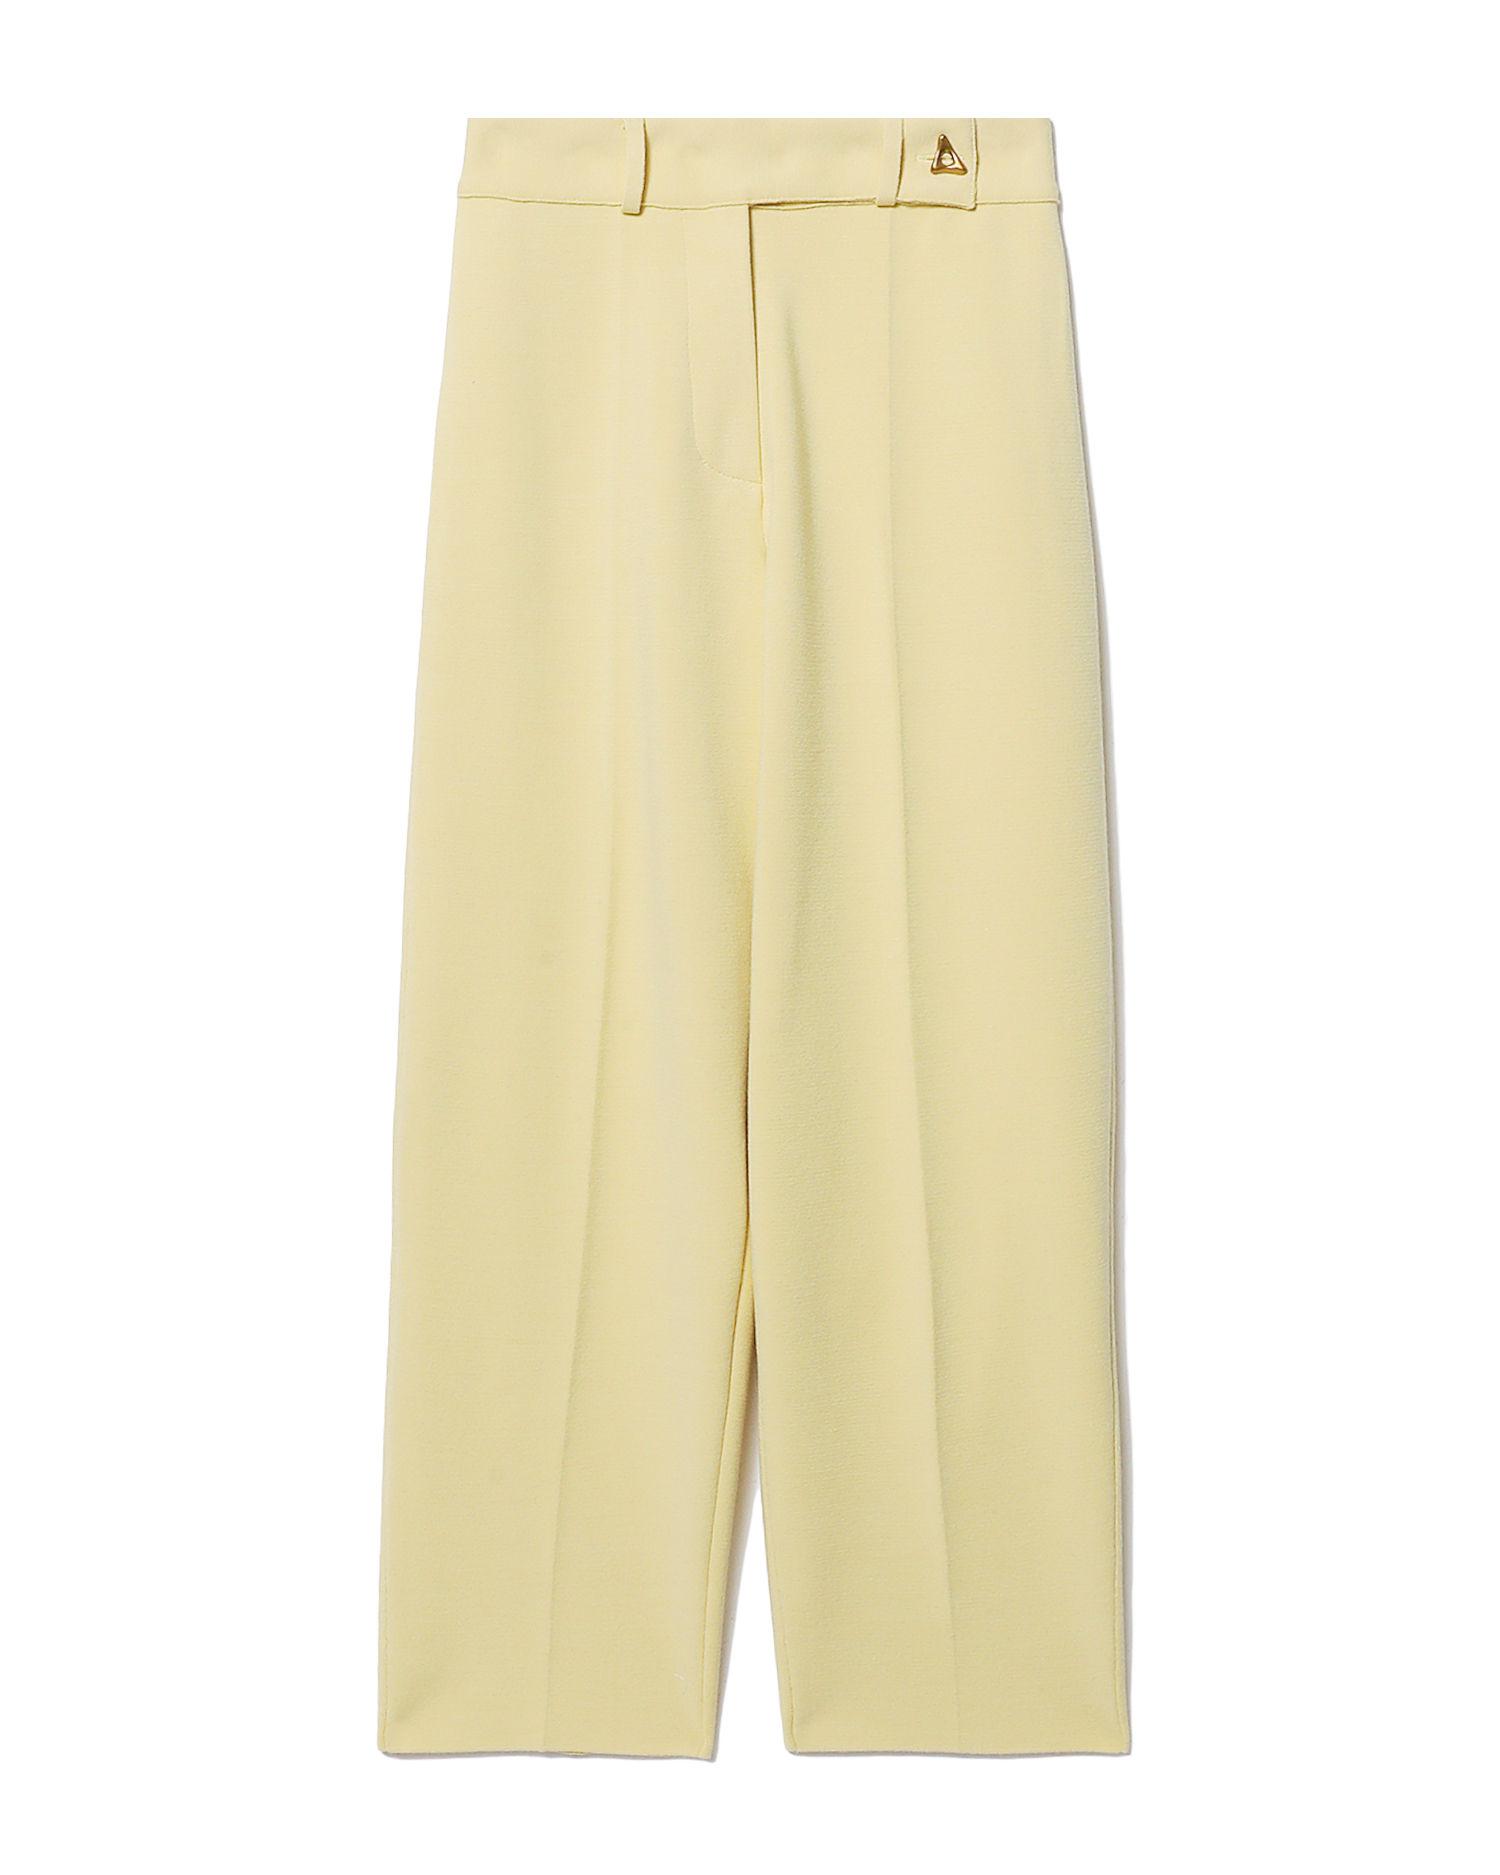 Madeleine knitted suiting pants by AERON